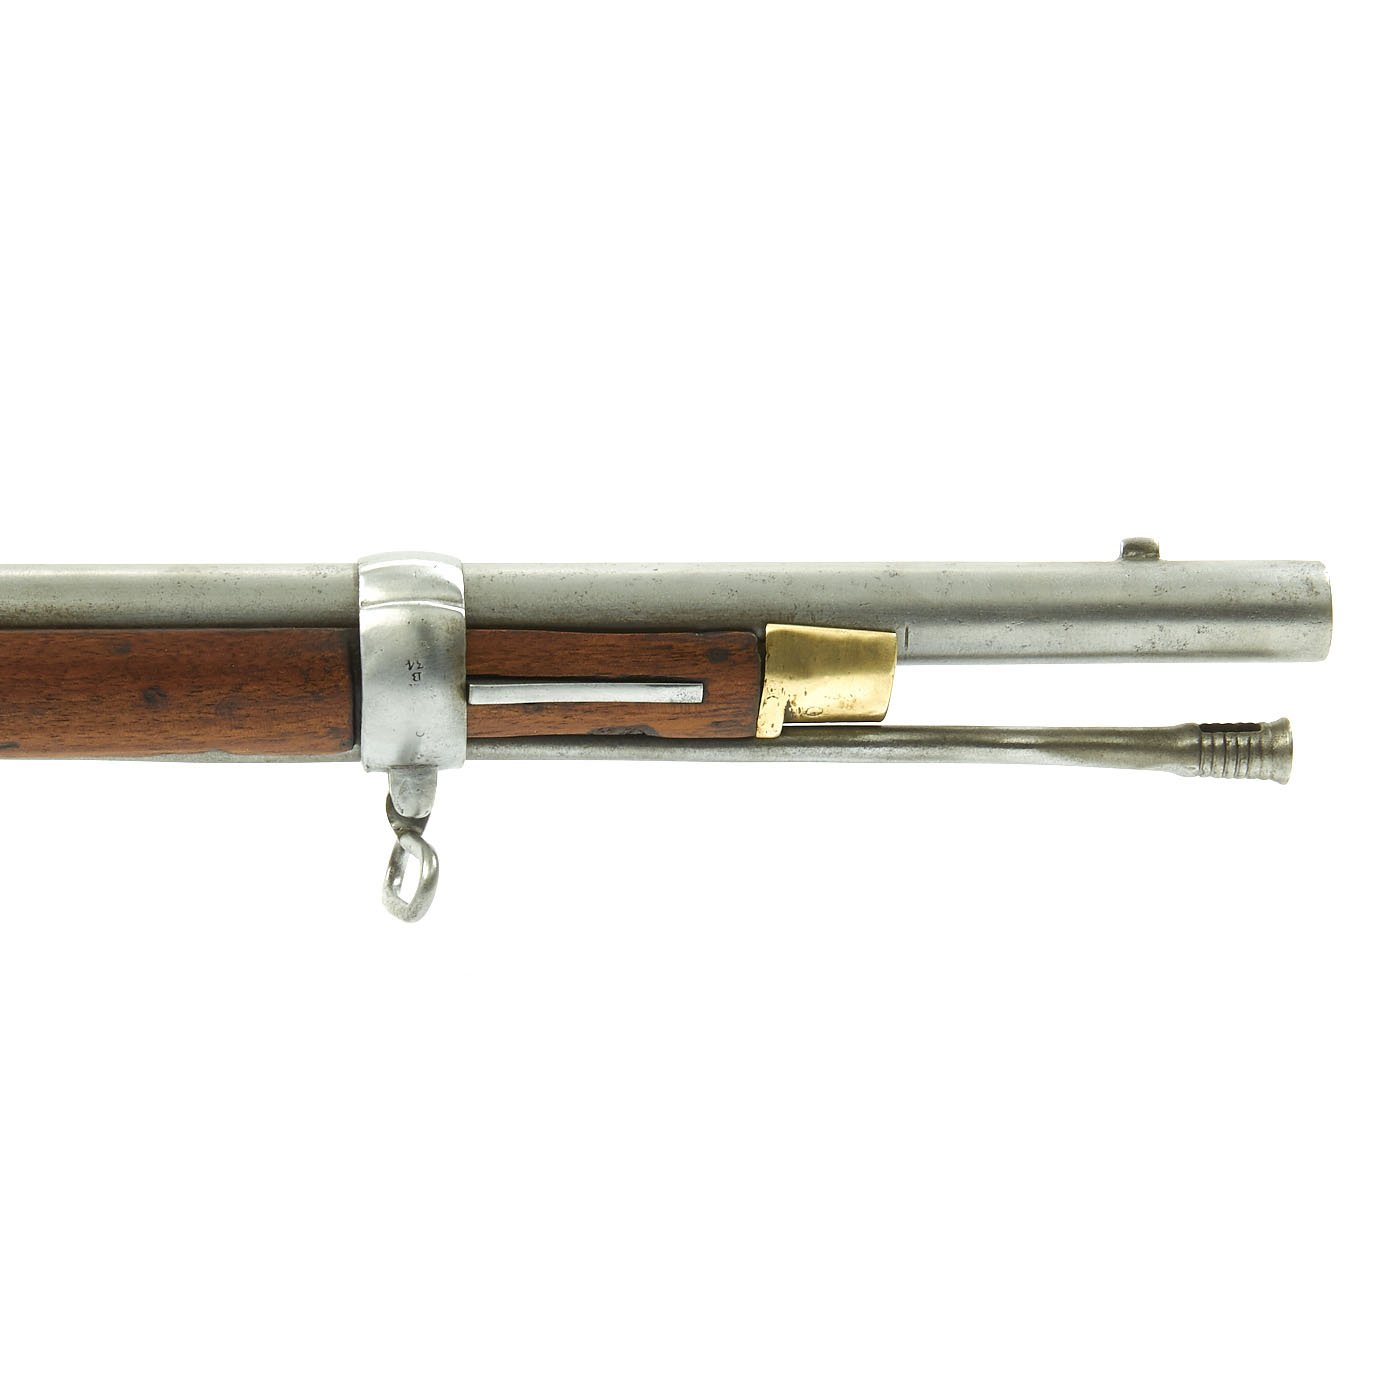 History Plus + - #1857IndependenceWarFacts 🔴Enfield Pattern 1853 Rifle-Musket  The immediate reason for the outbreak of War of 1857 was the introduction  of a new firearm in India:- the Pattern 1853 Enfield